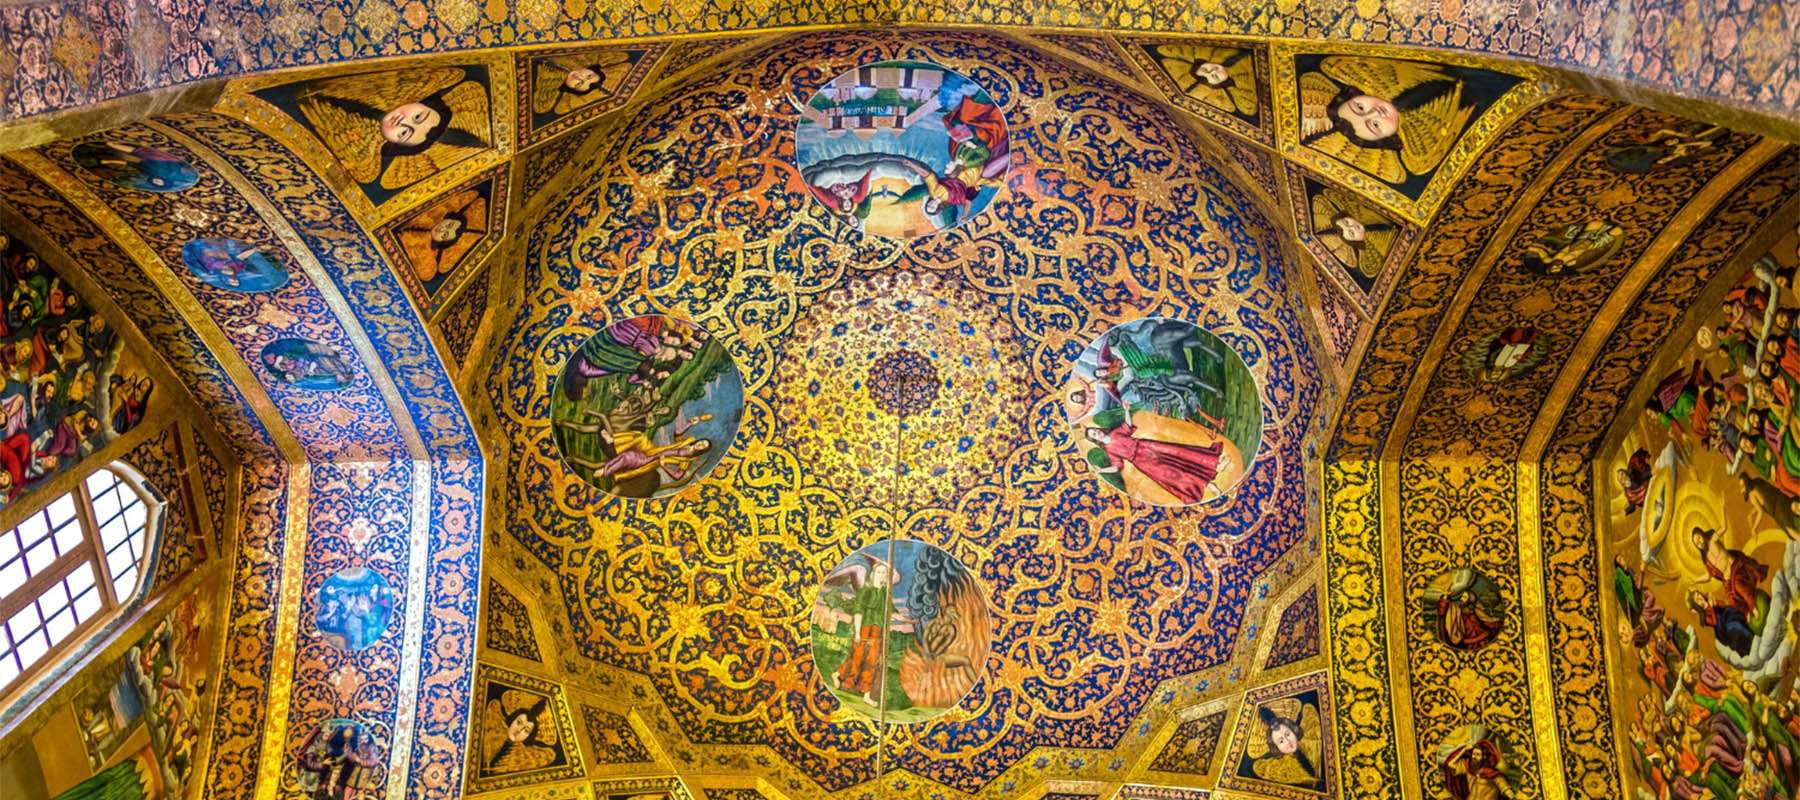 Vank Church in Isfahan: A Testament of Beauty and History